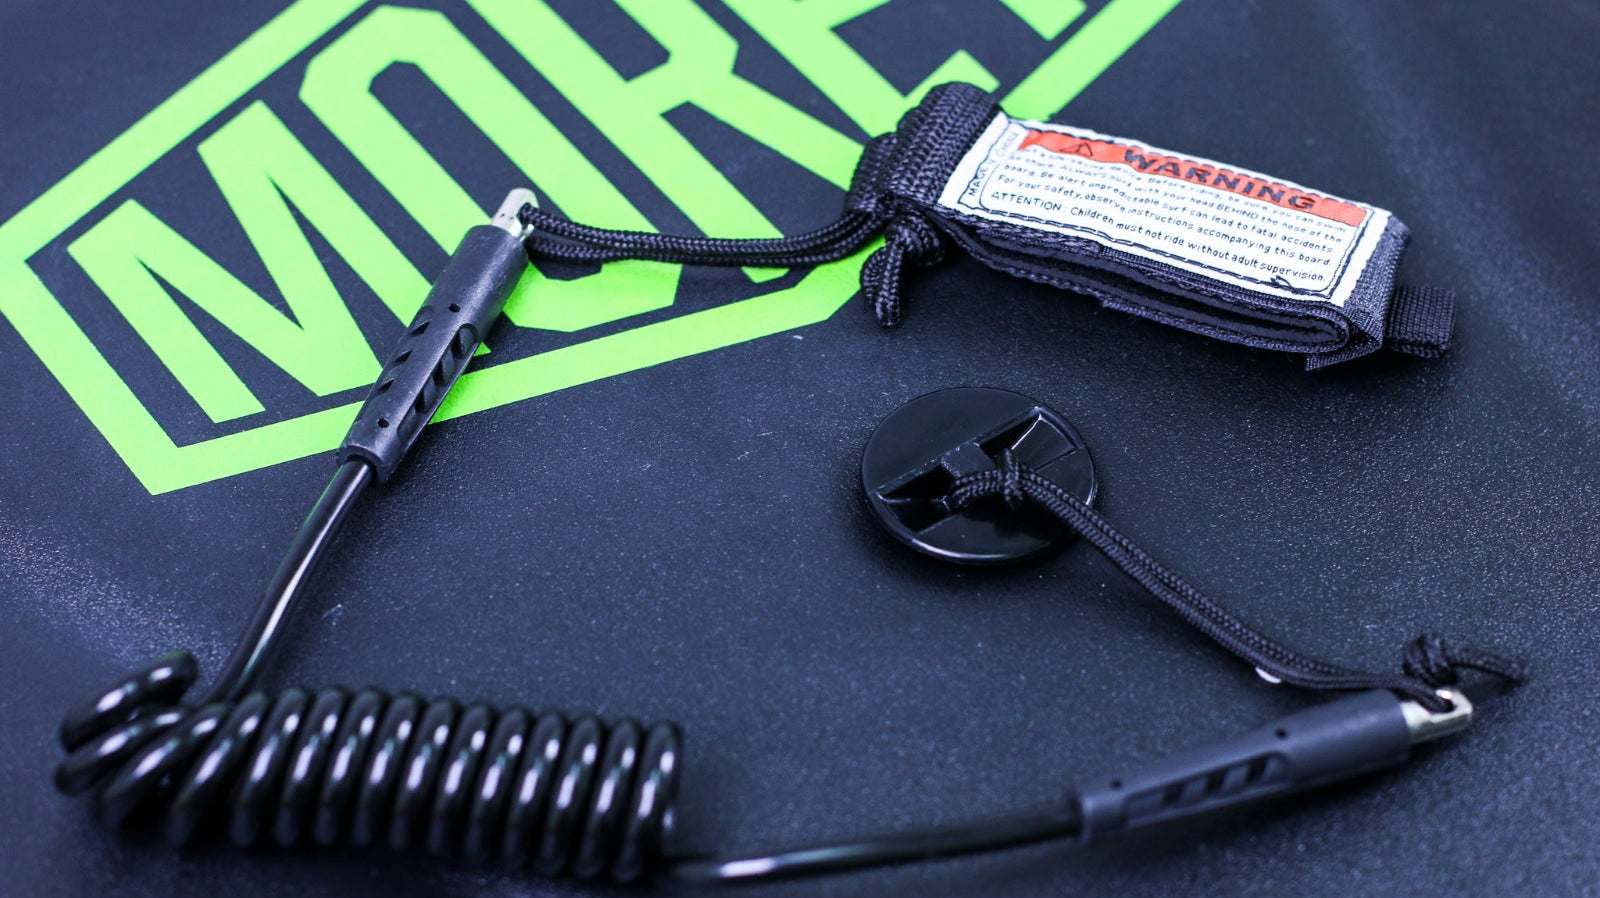 Installing a Bodyboard Leash and Plug: Morey's Step-by-Step Guide